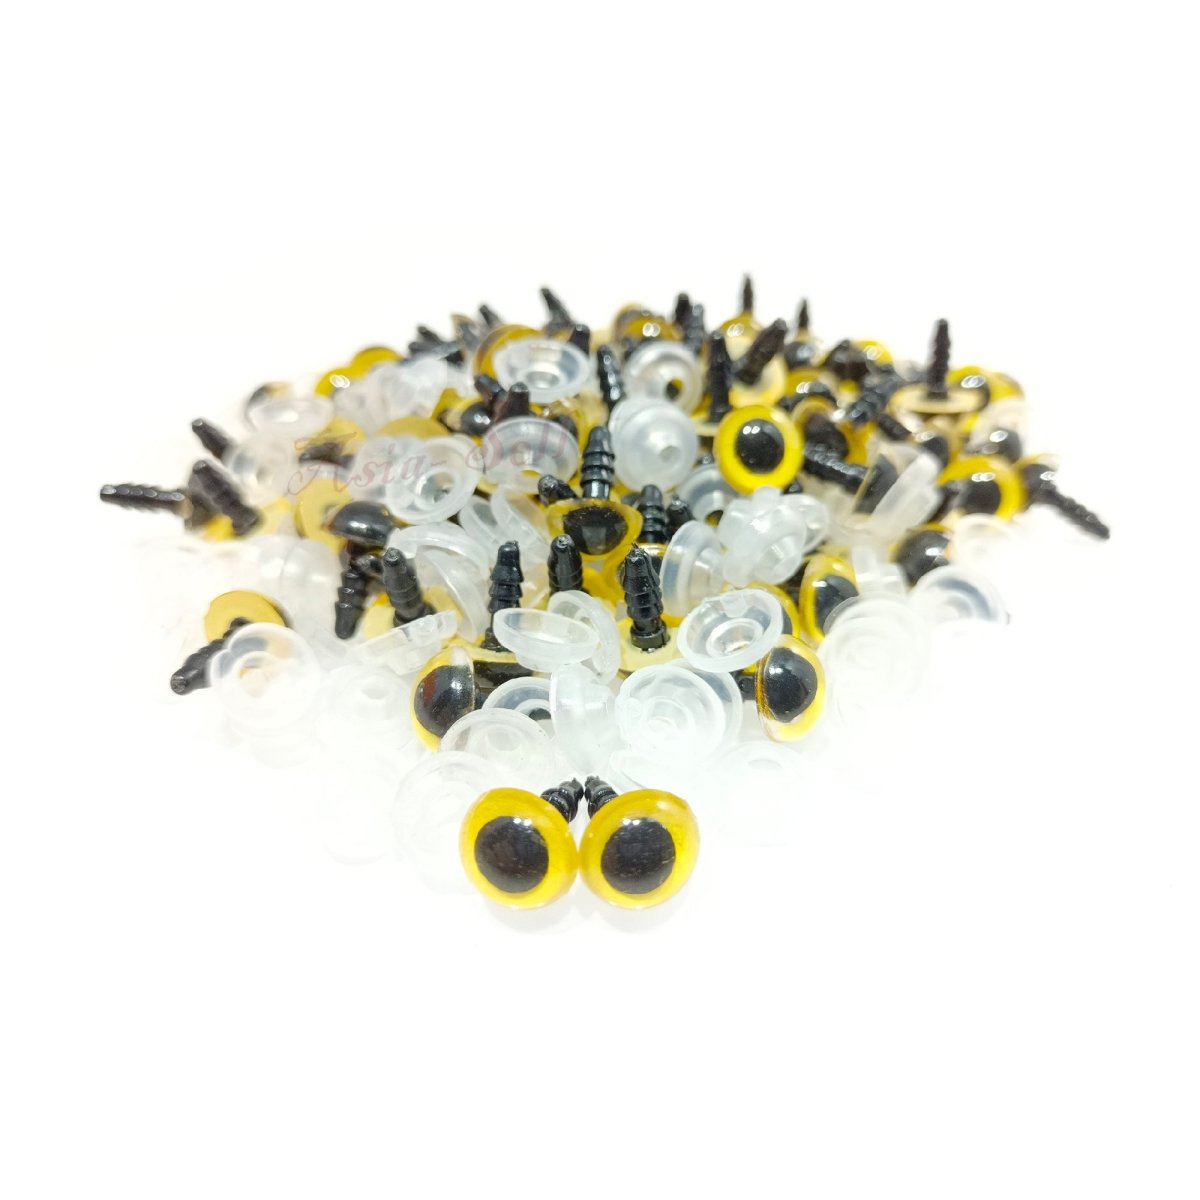 20pcs 10mm Colour Safety Eyes For Teddy Bear Doll Animal Puppet Crafts Plastic Eyes - Yellow - - Asia Sell